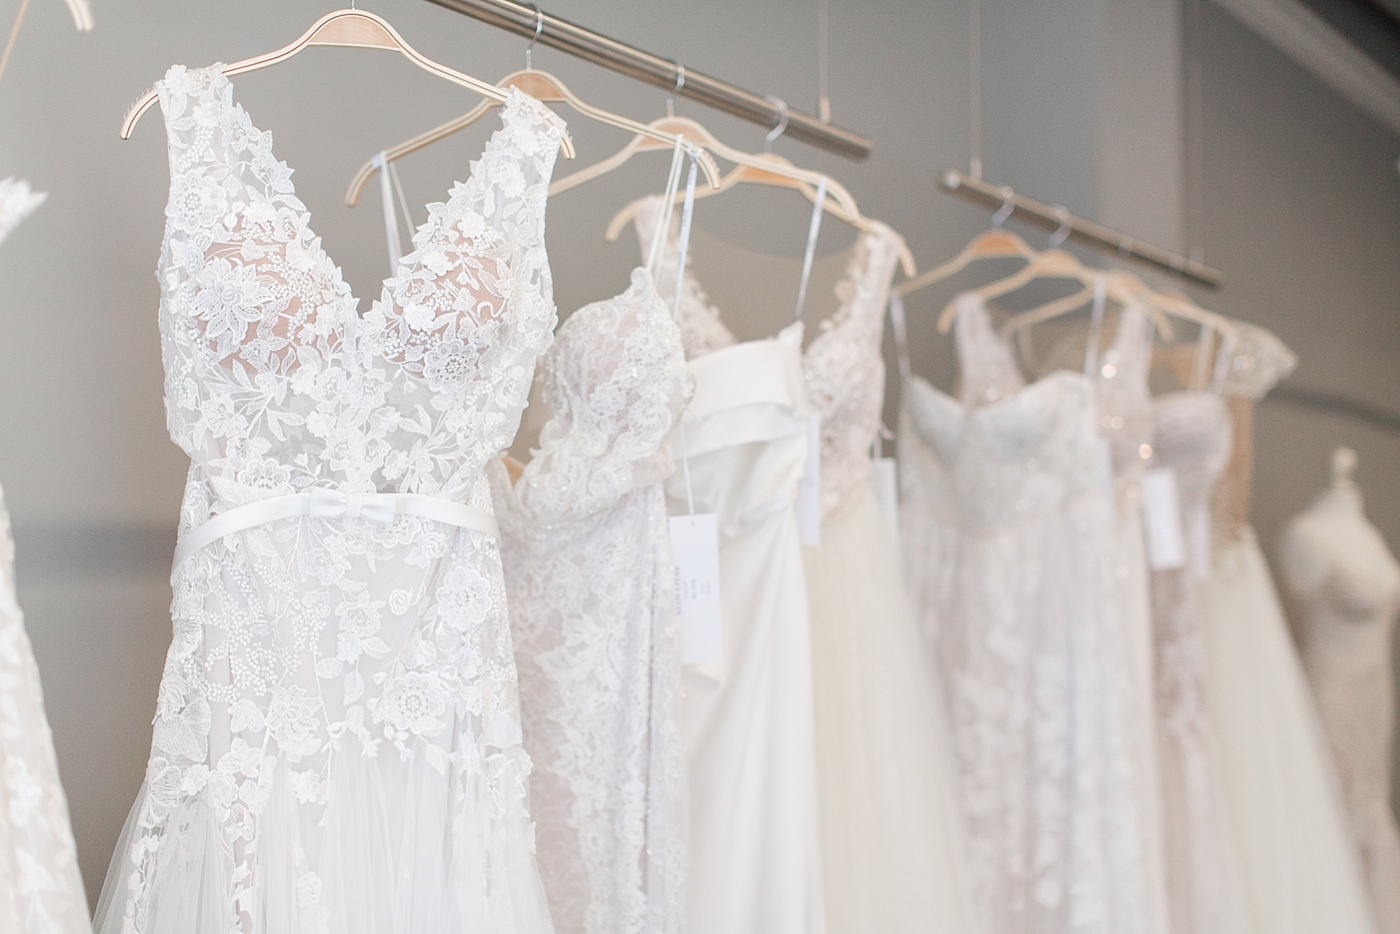 Tips-Choosing-Your-Bridal-Boutique-Jessica-Haley-Bridal-Photo